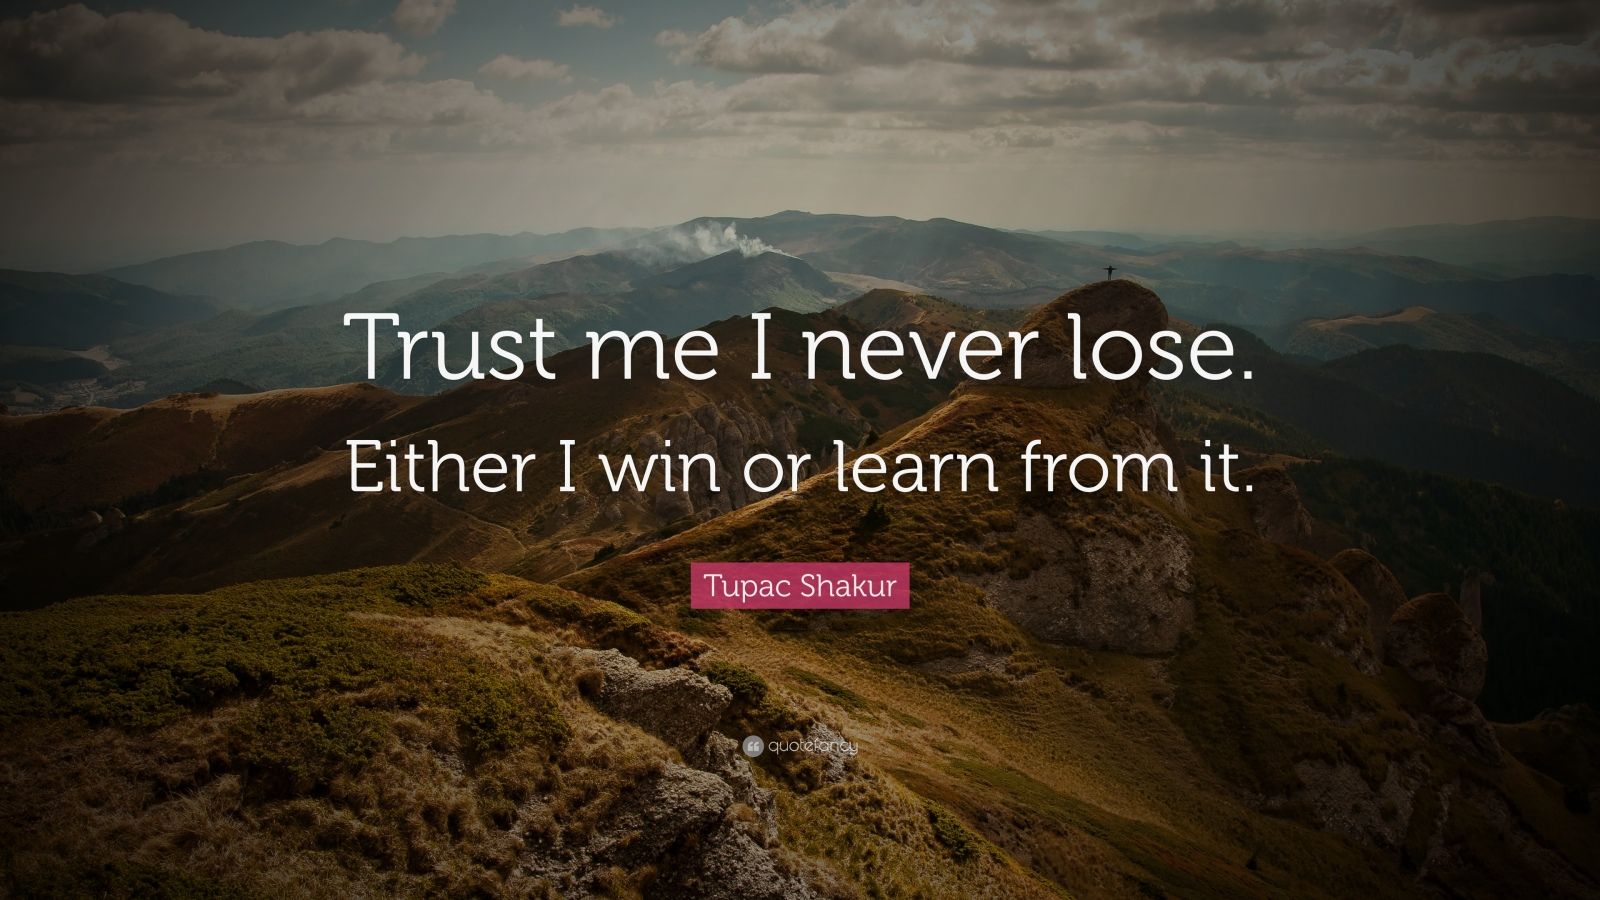 Tupac Shakur Quote Trust me I never lose. Either I win 